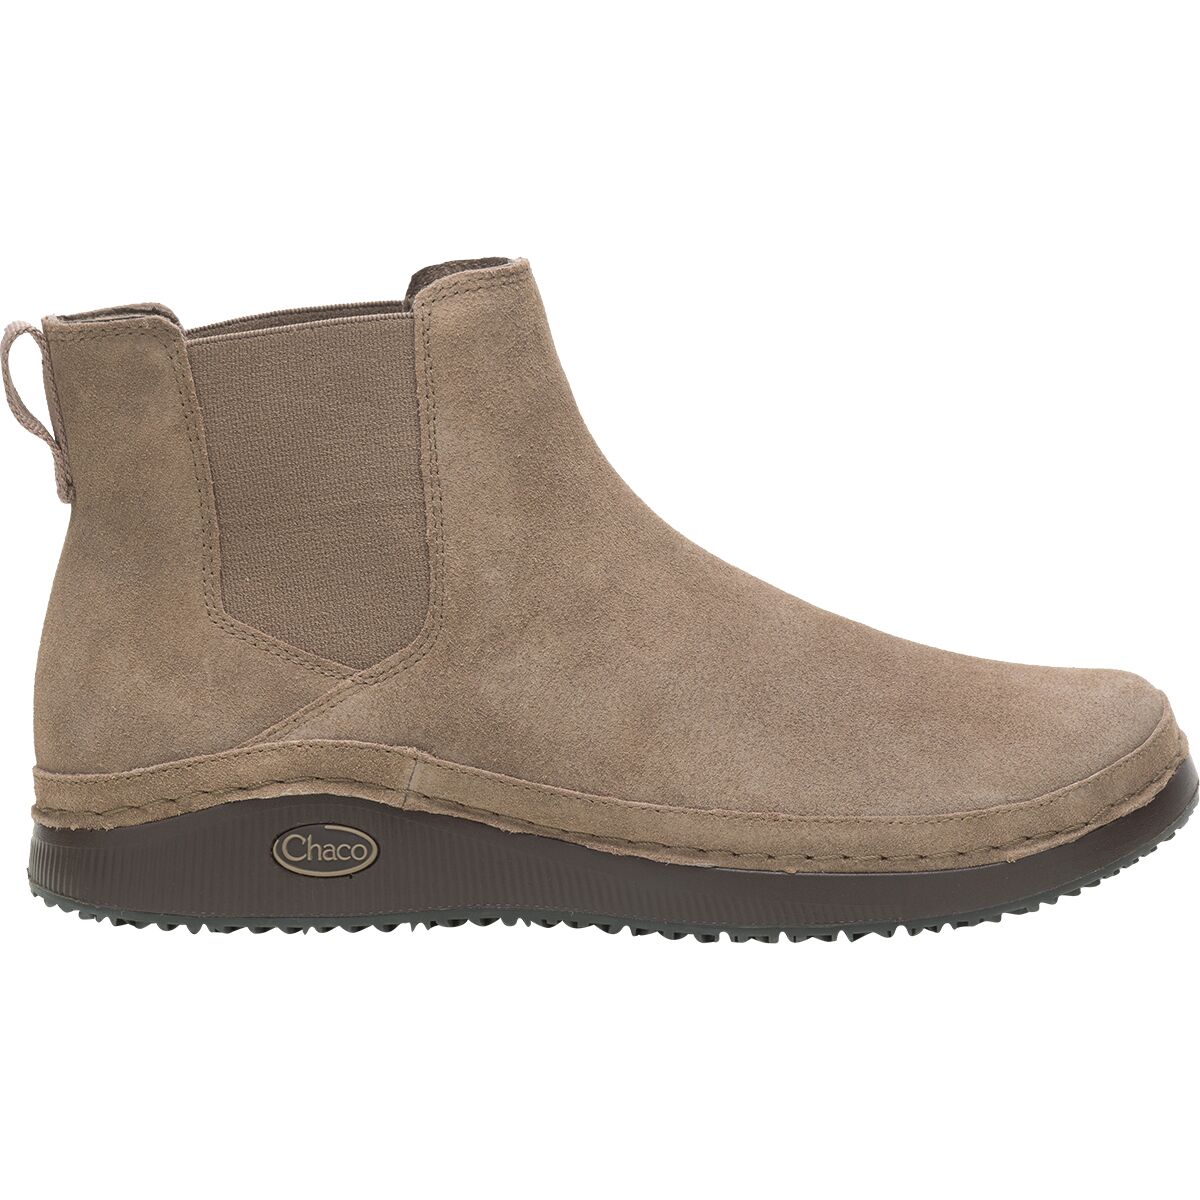 Chaco Paonia Chelsea Boot - Men's